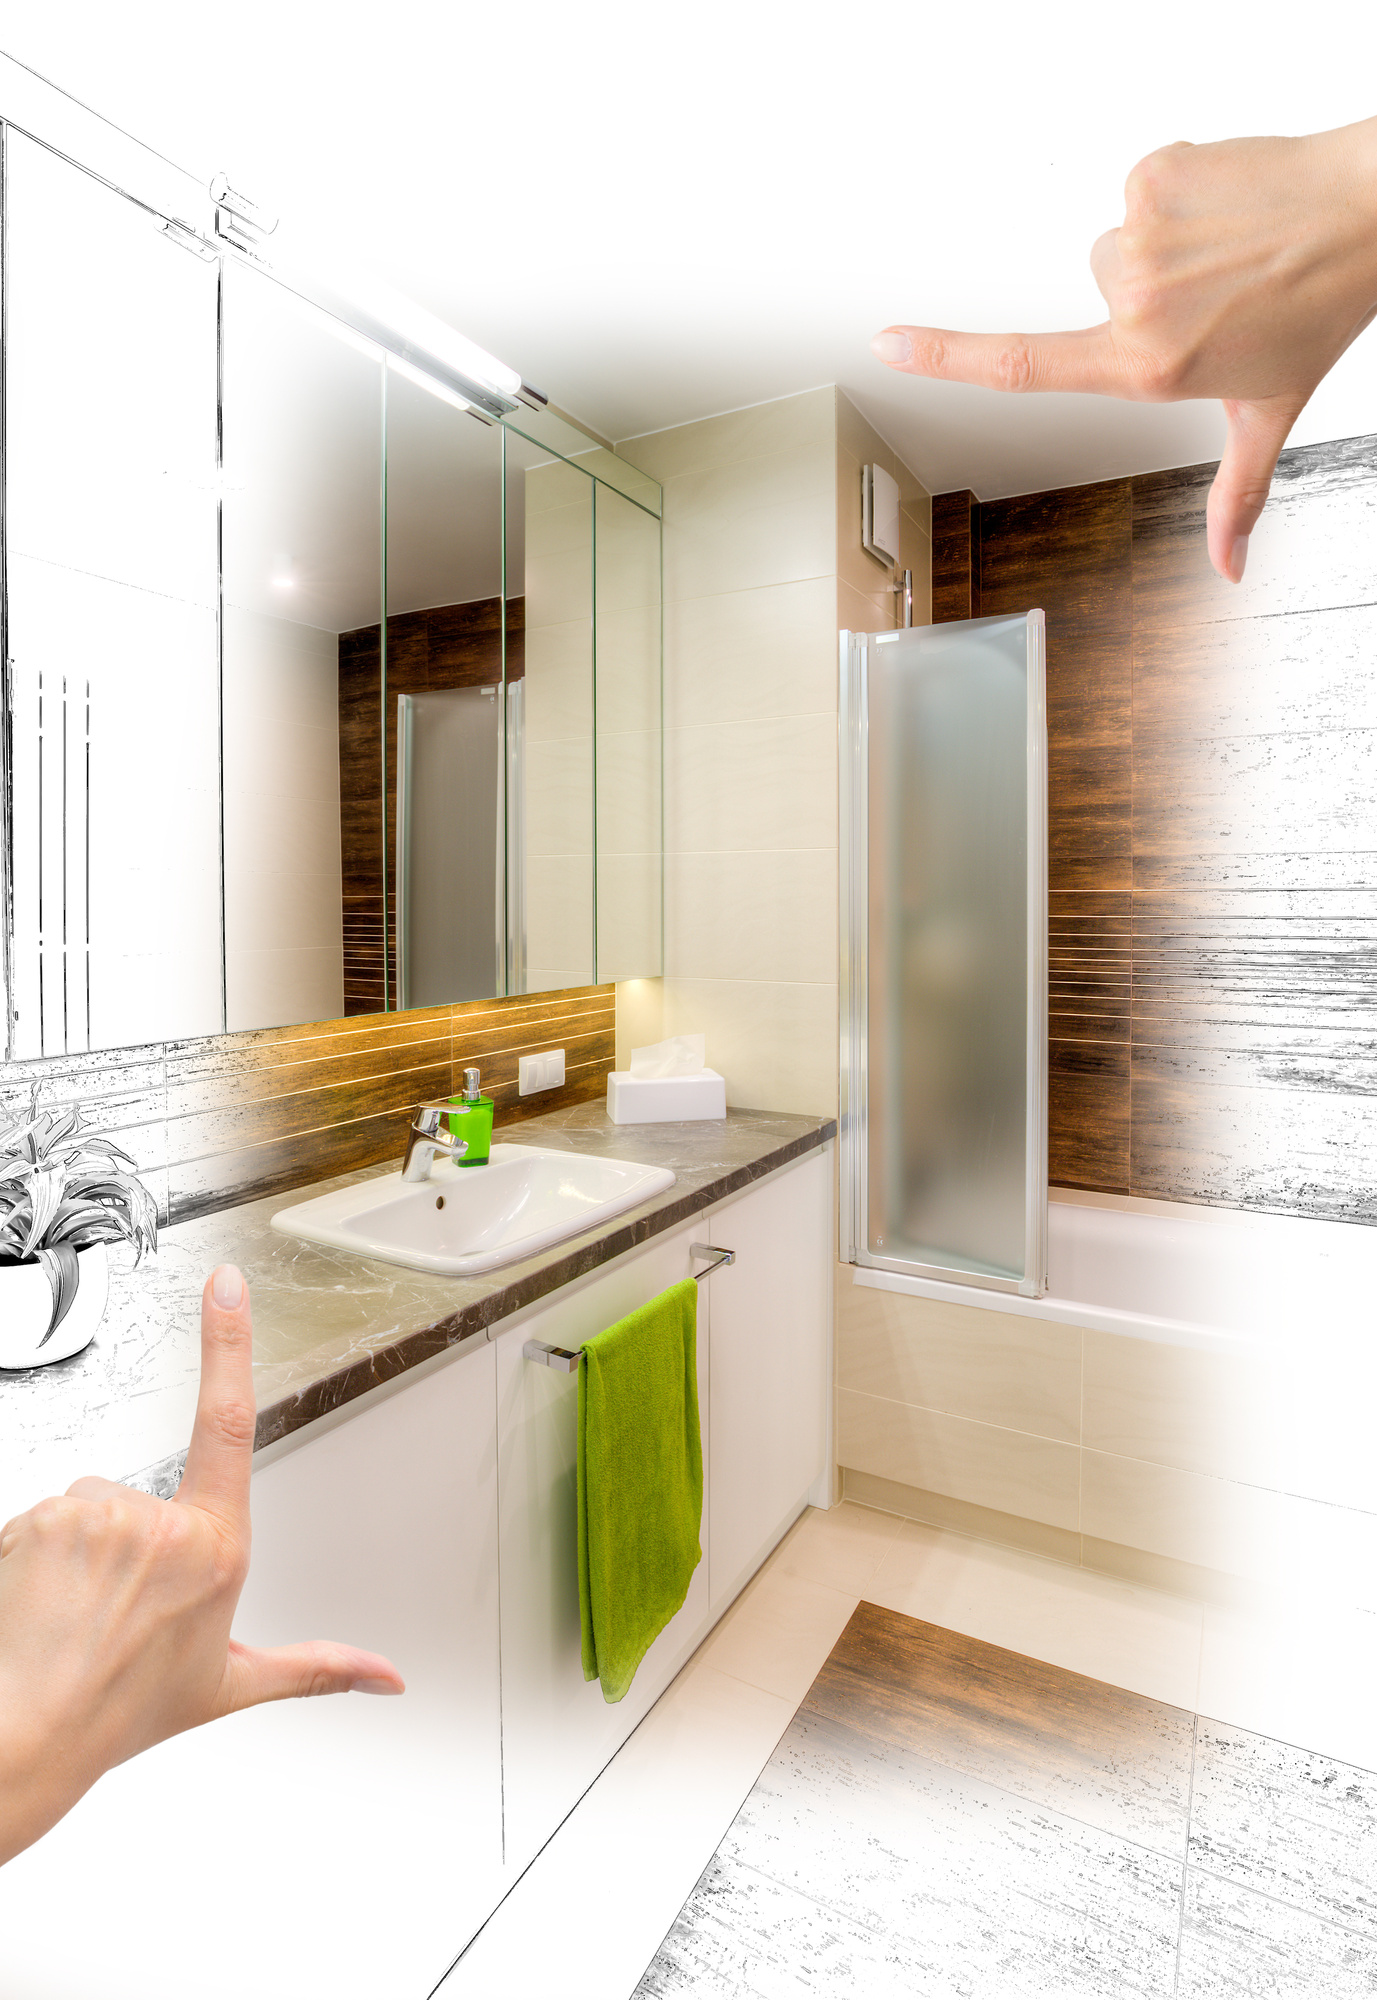 hands in frame envisioning a new bathroom